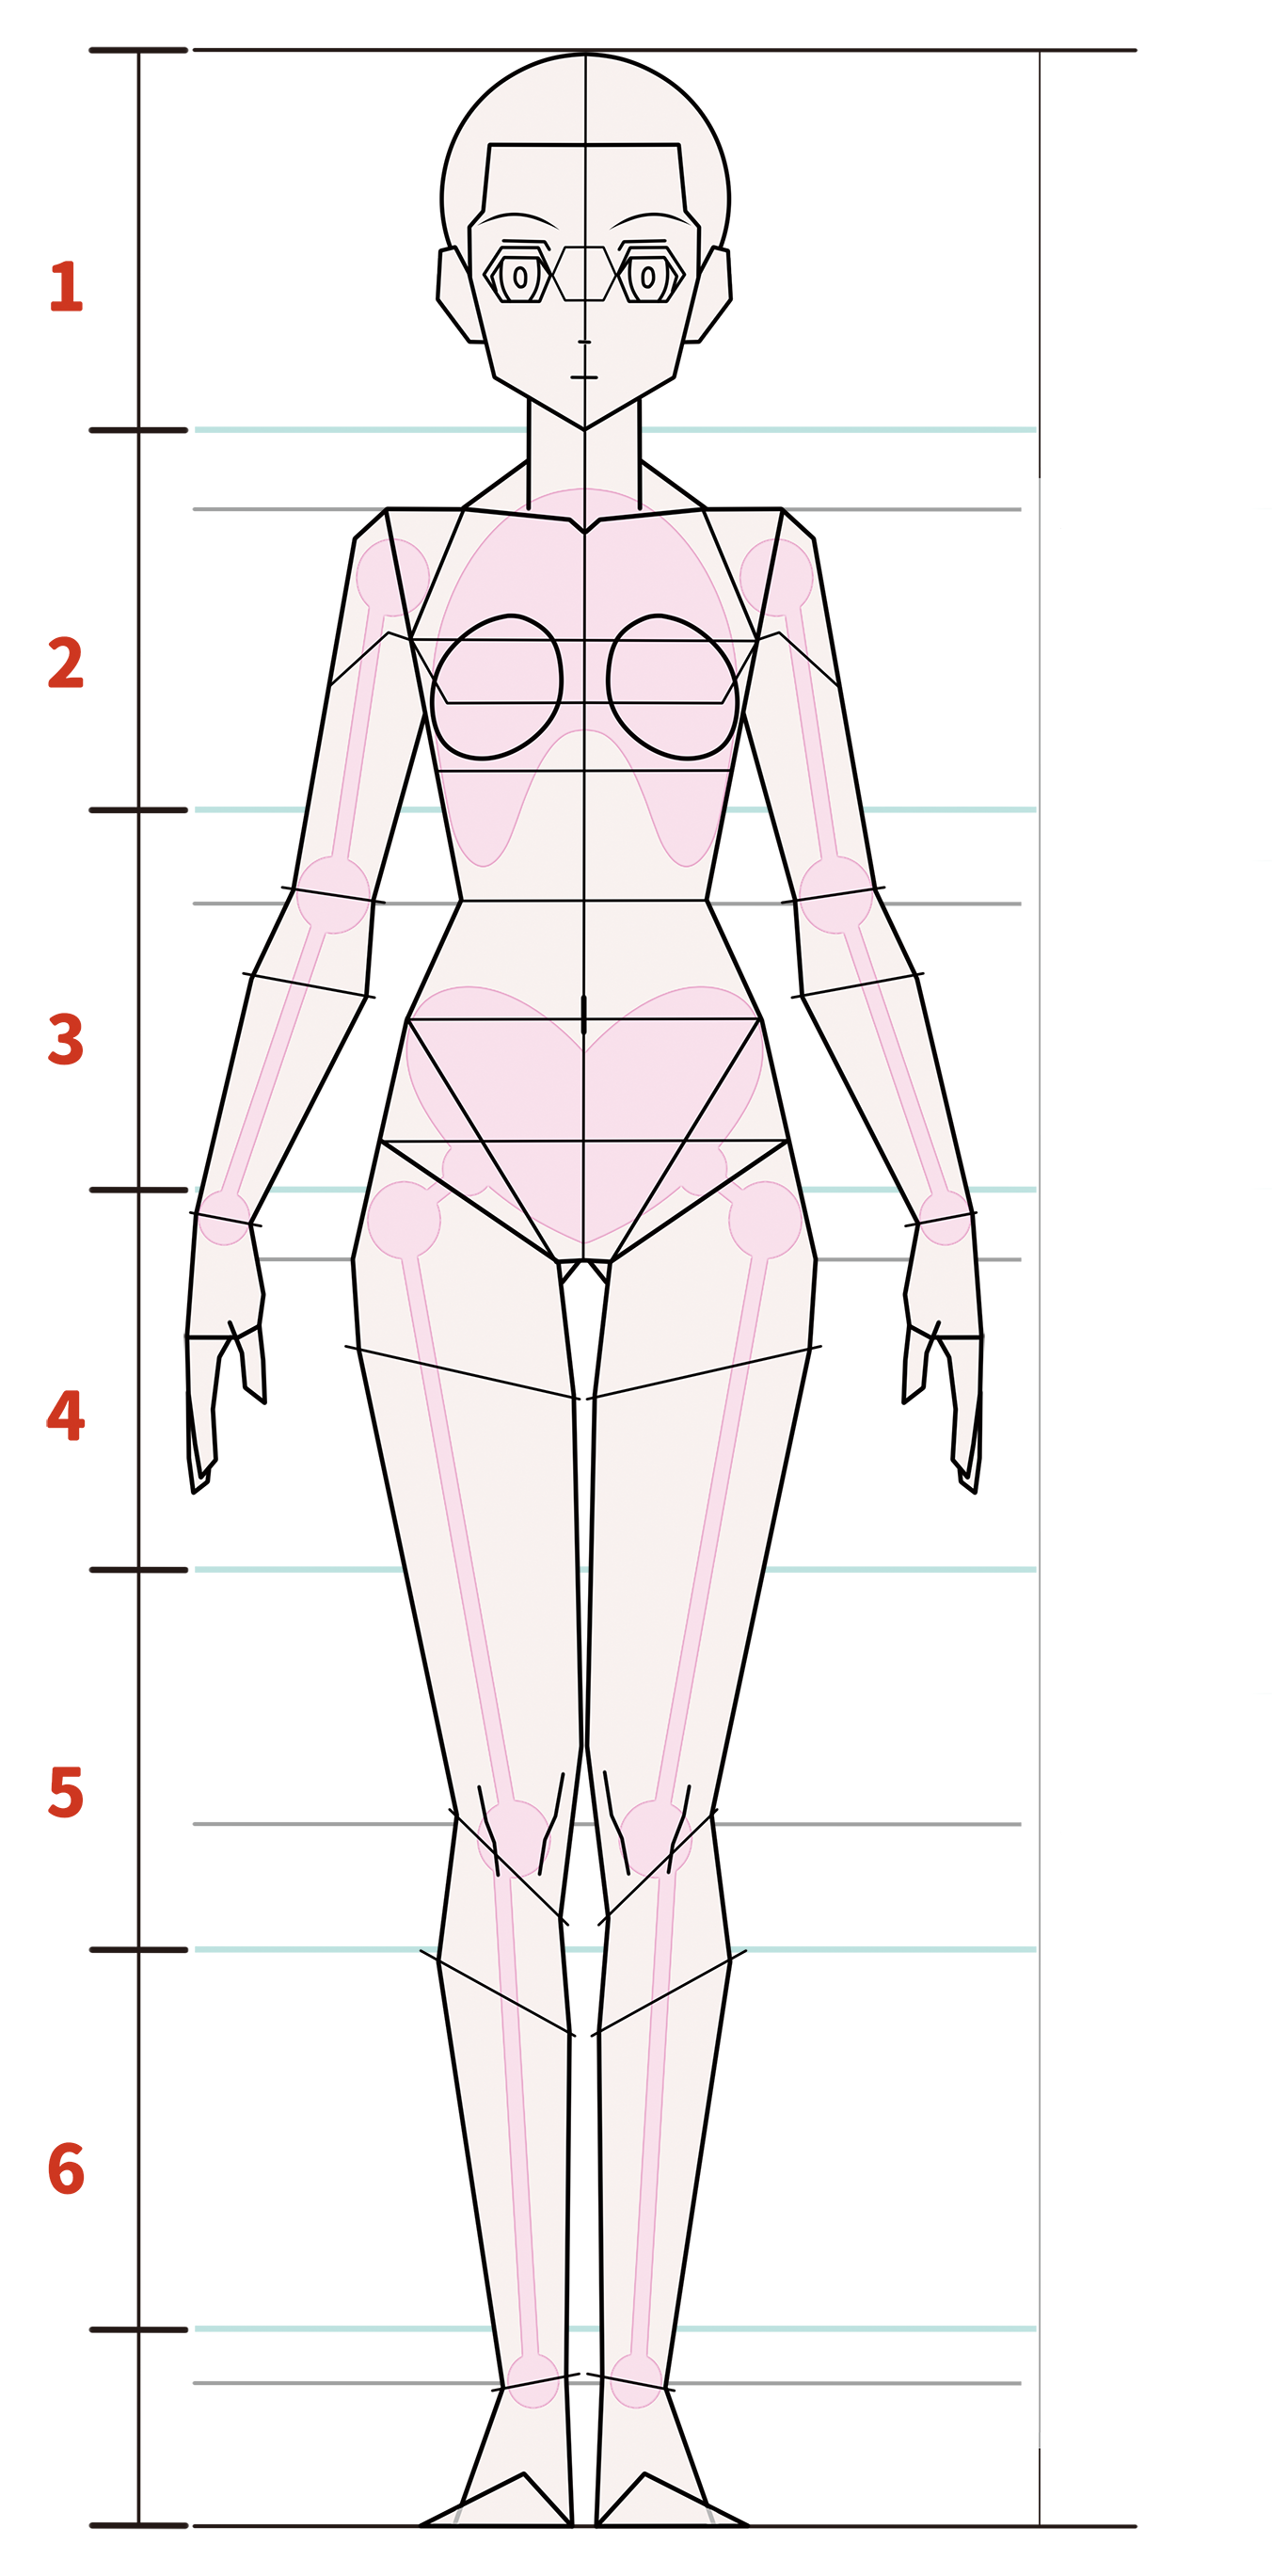 manga steps  Beginner sketches, Anime face drawing, Drawing anime bodies